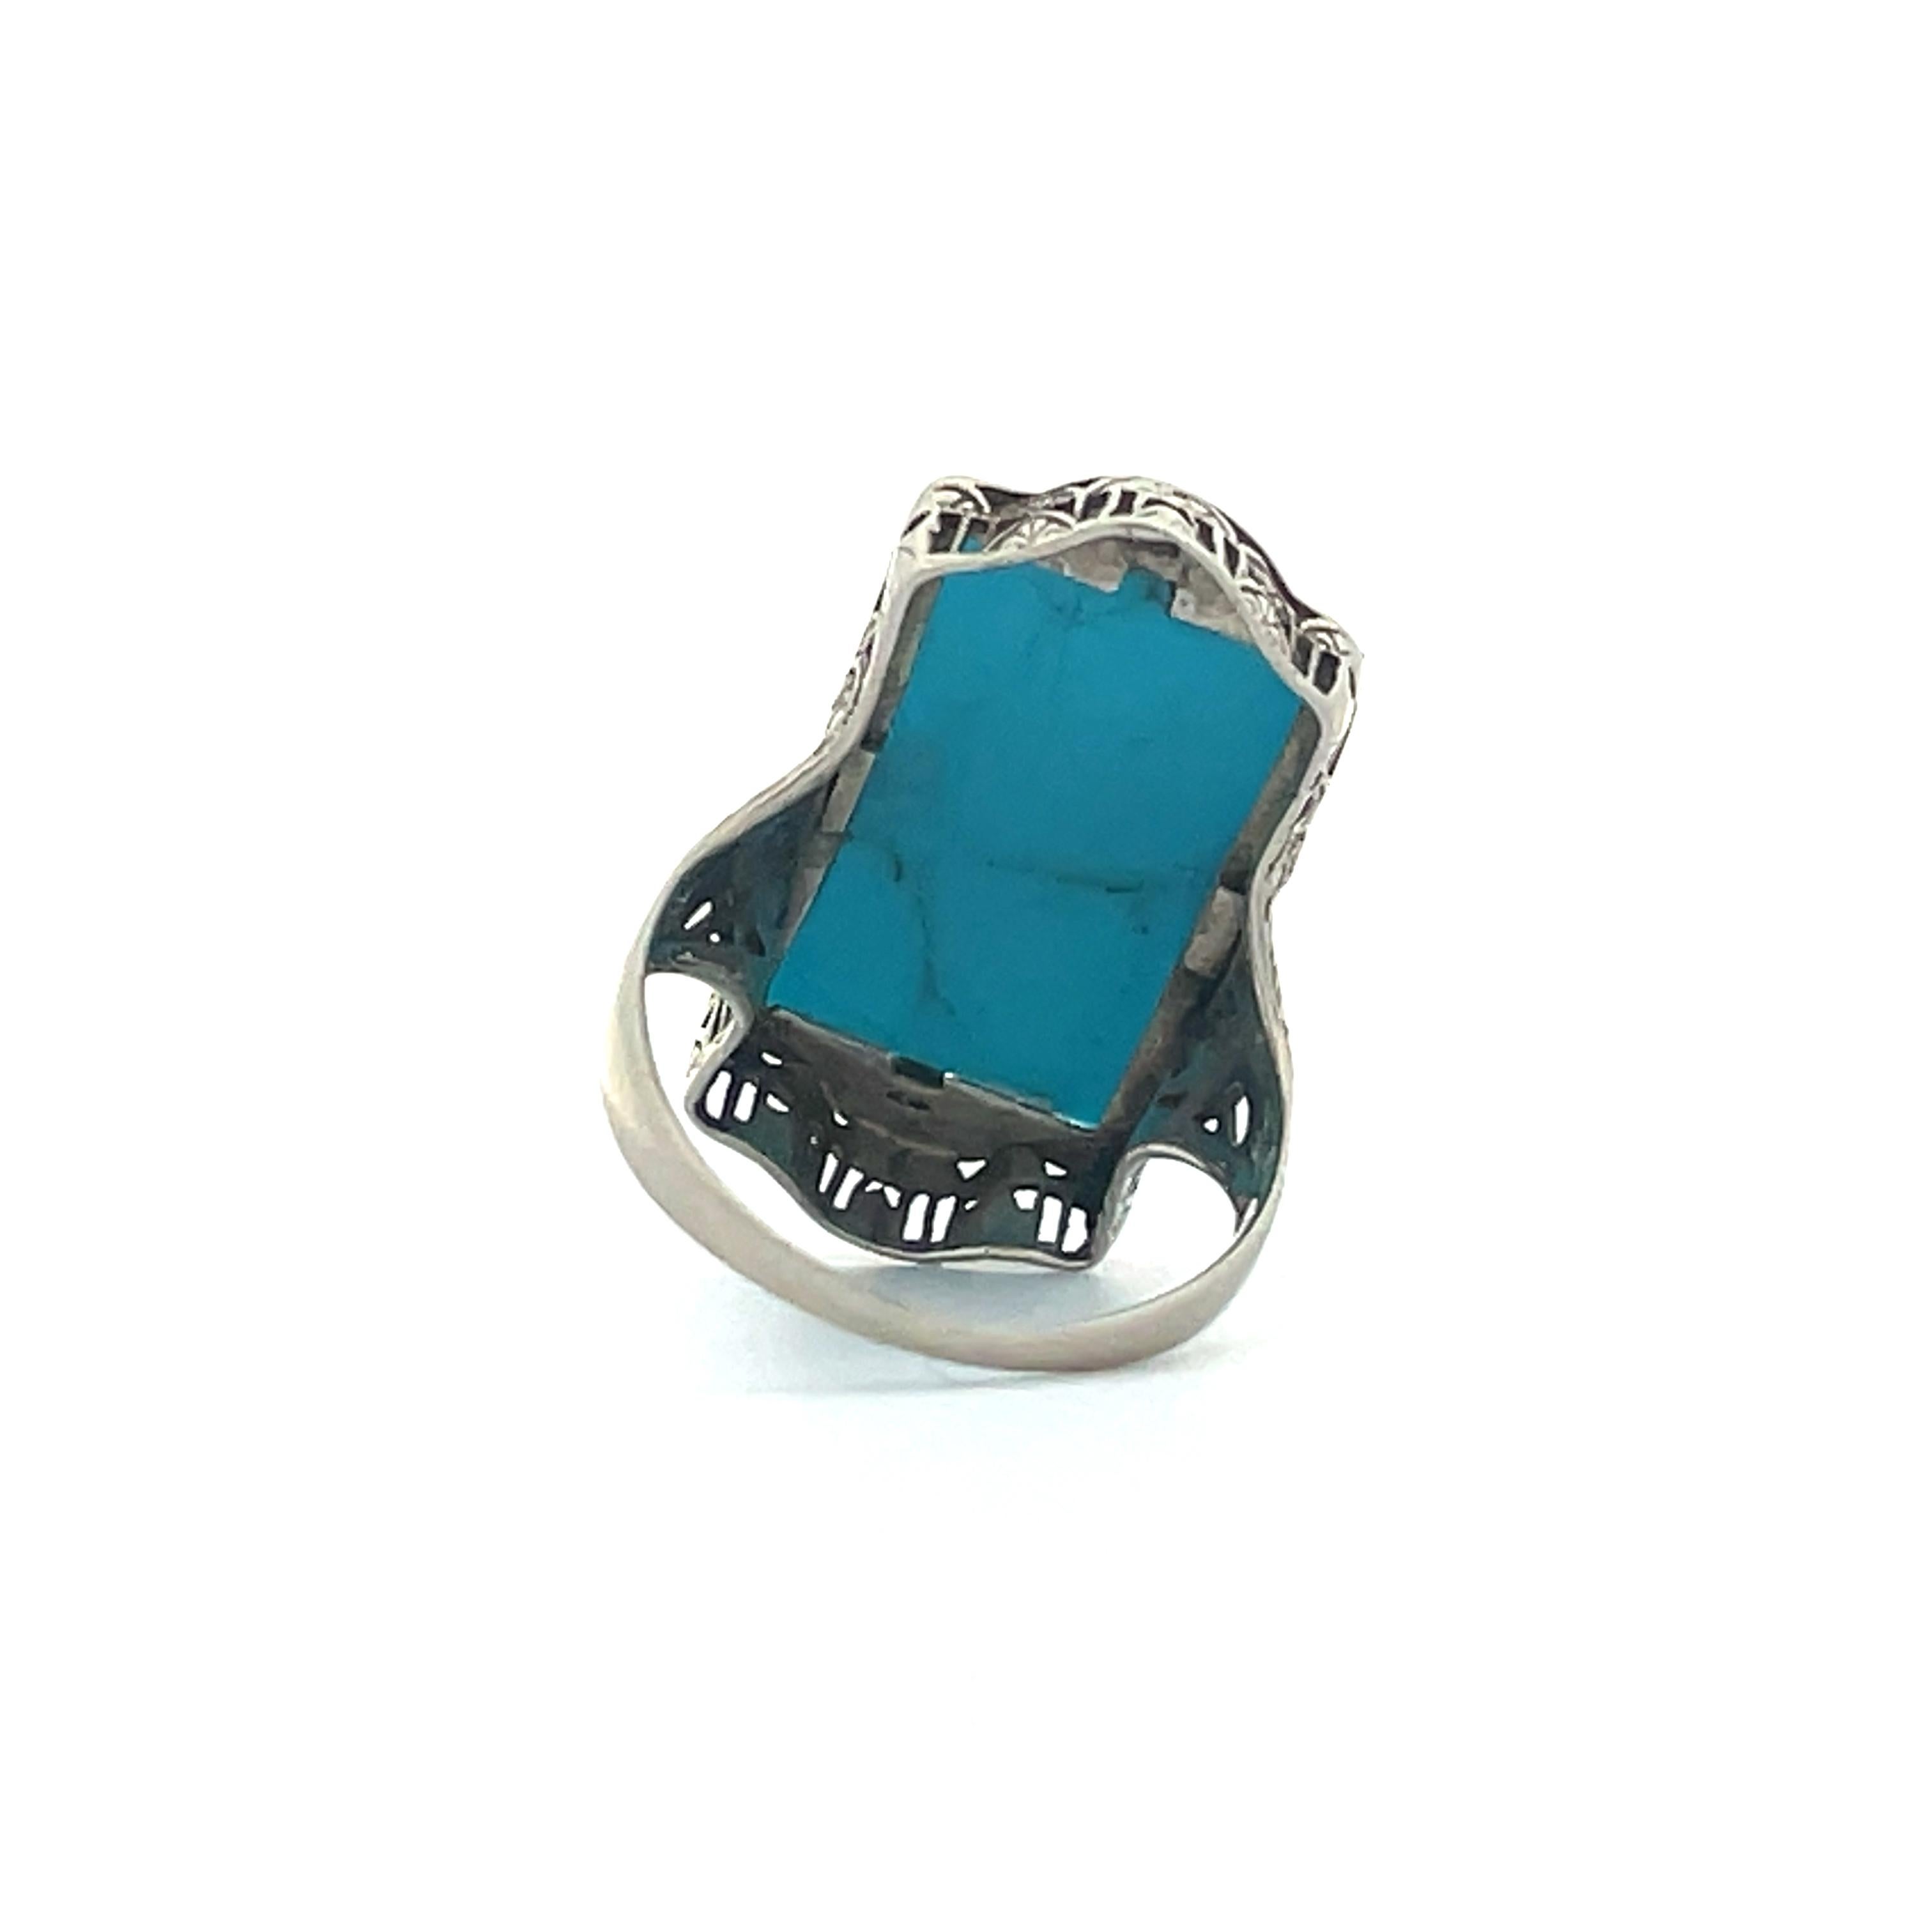  1920s 14k White Gold and Turquoise Cabochon Filigree Ring  2